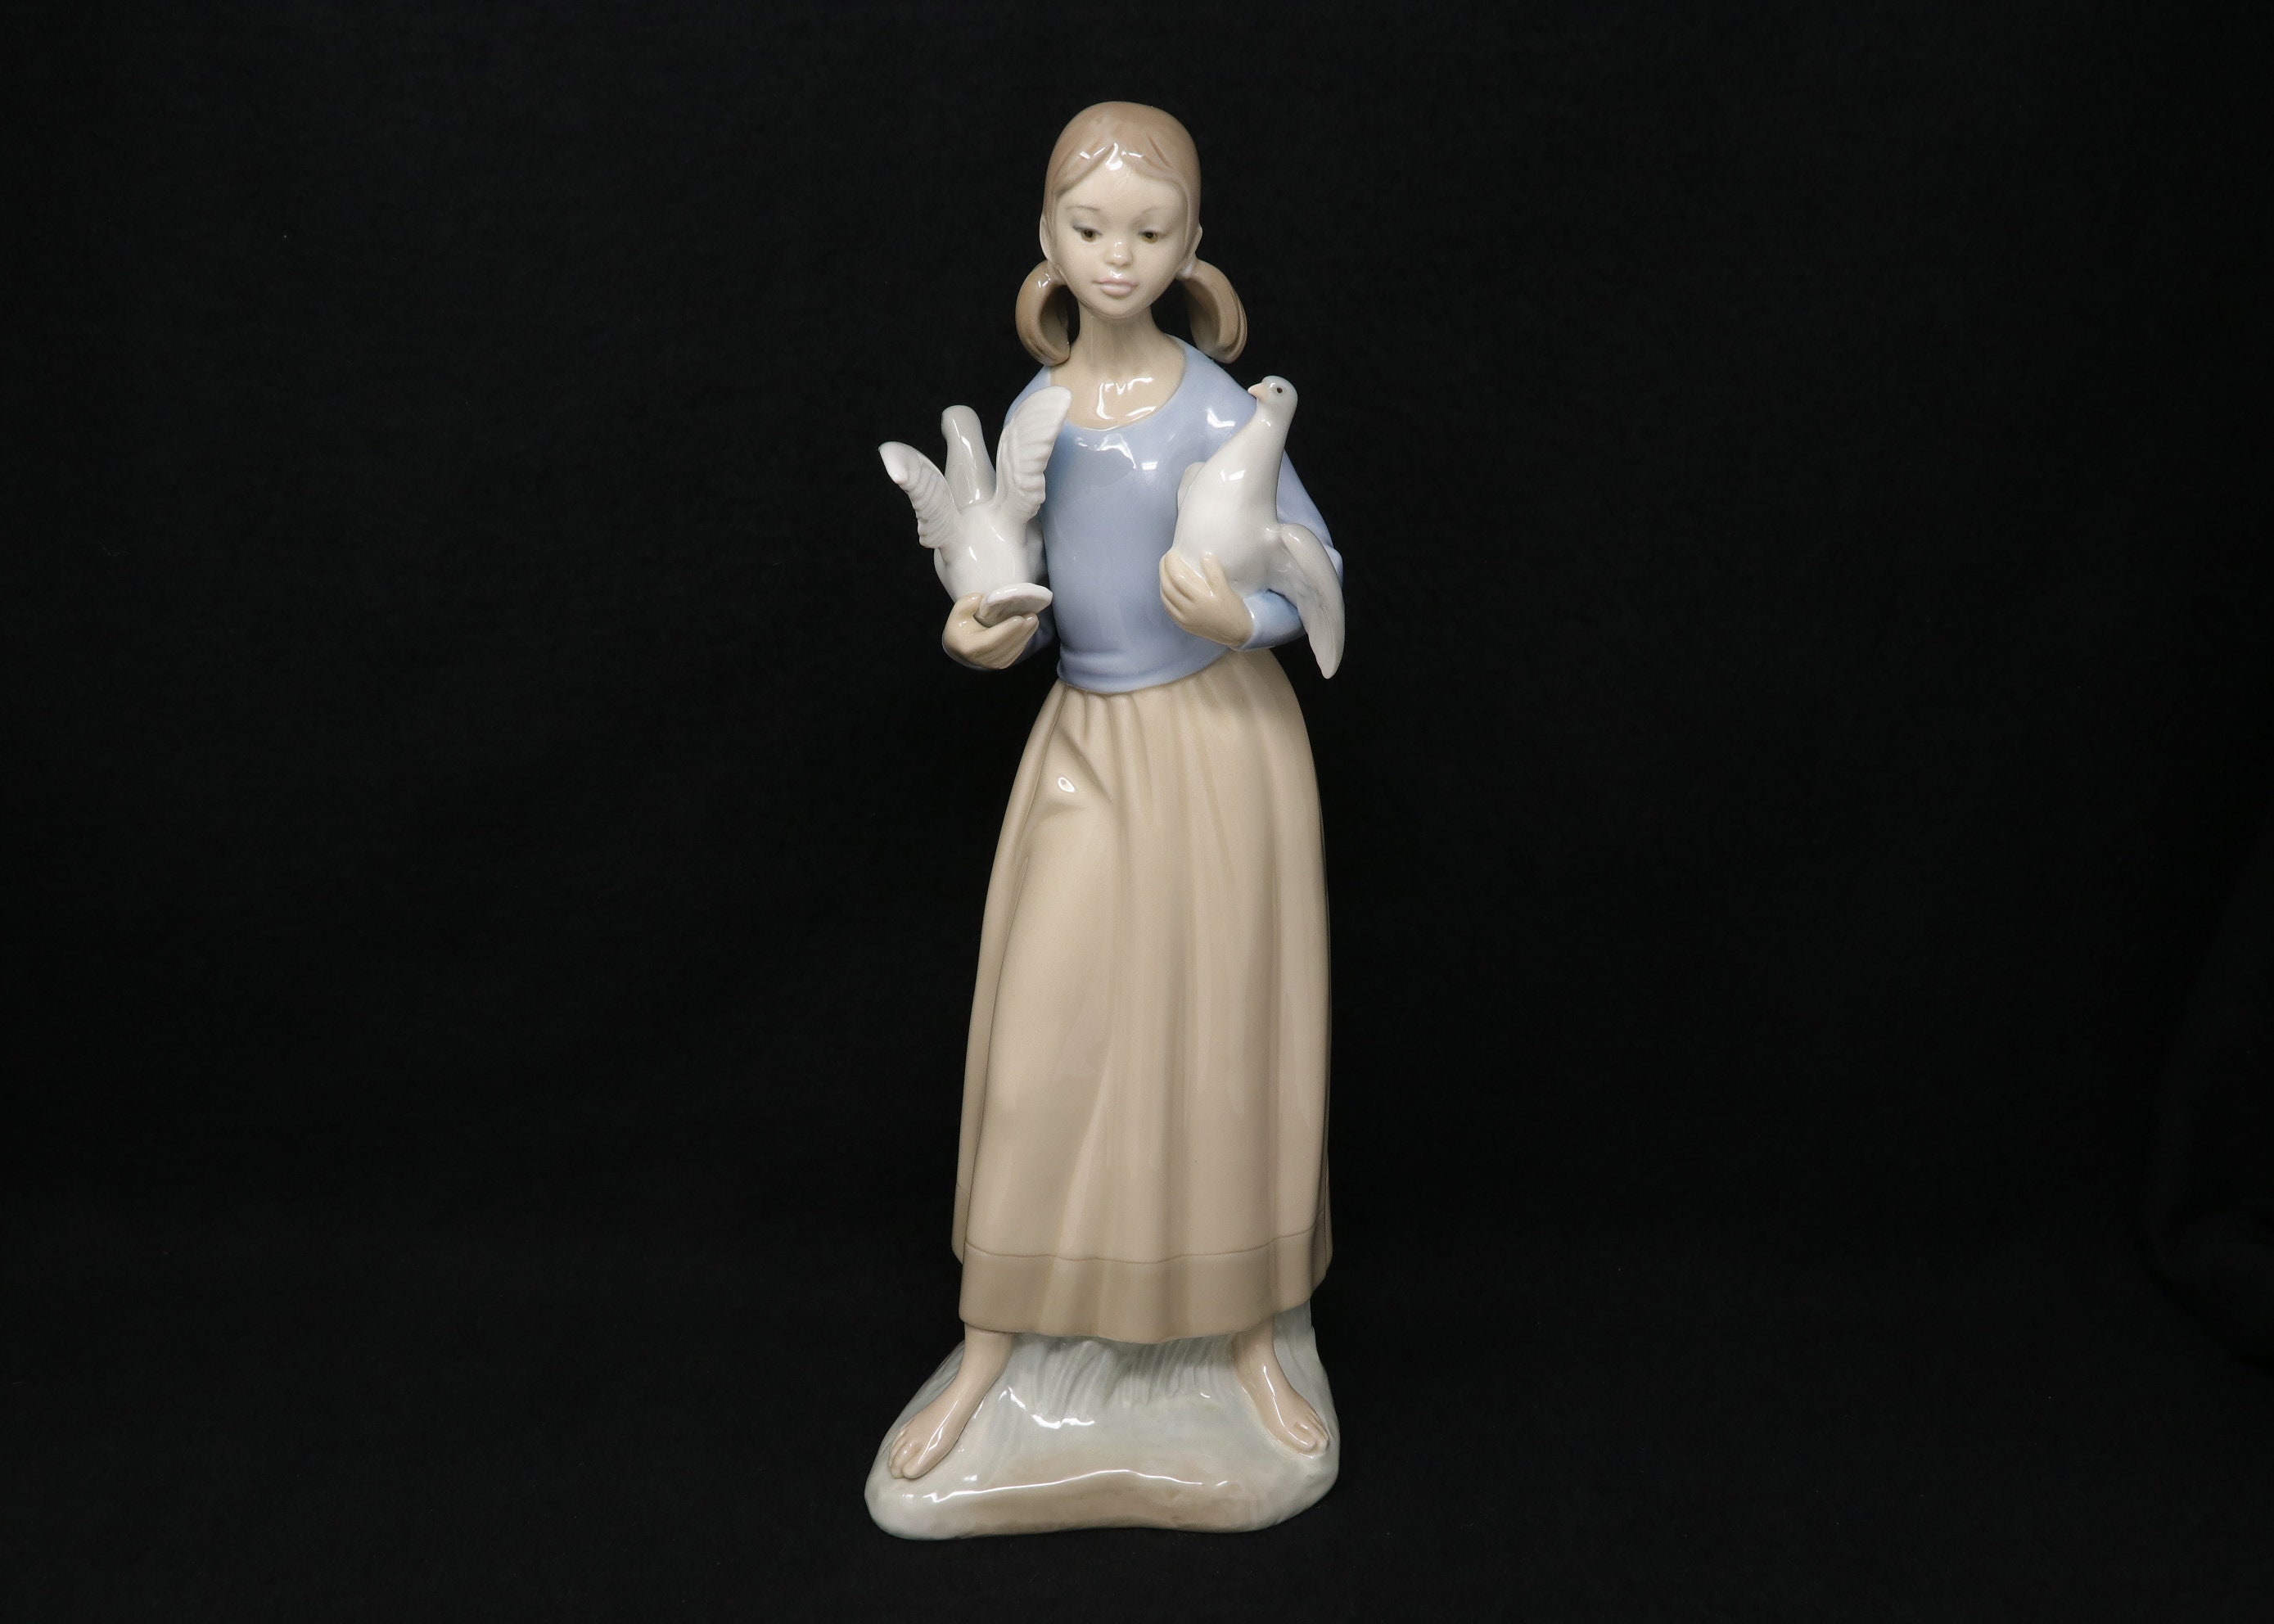 LARGE 14 Inch Zaphir by Lladro Girl With 2 Doves, Porcelain Zaphir Figurine,  Girl With Doves /birds, 1970s Vintage Lladro Collector Gift 